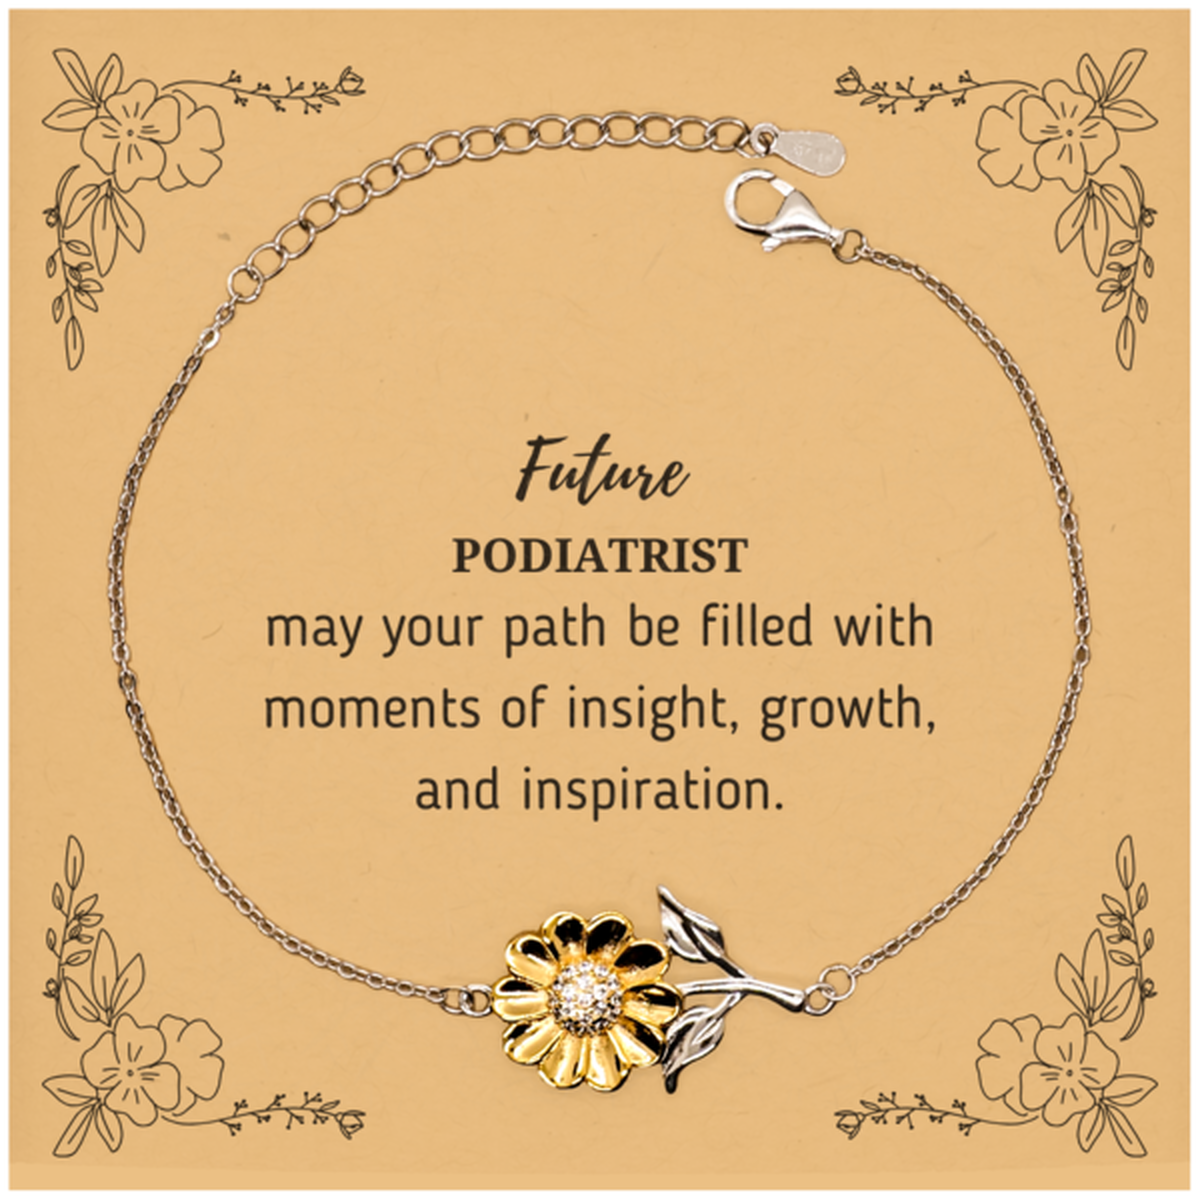 Future Podiatrist Gifts, May your path be filled with moments of insight, Graduation Gifts for New Podiatrist, Christmas Unique Sunflower Bracelet For Men, Women, Friends